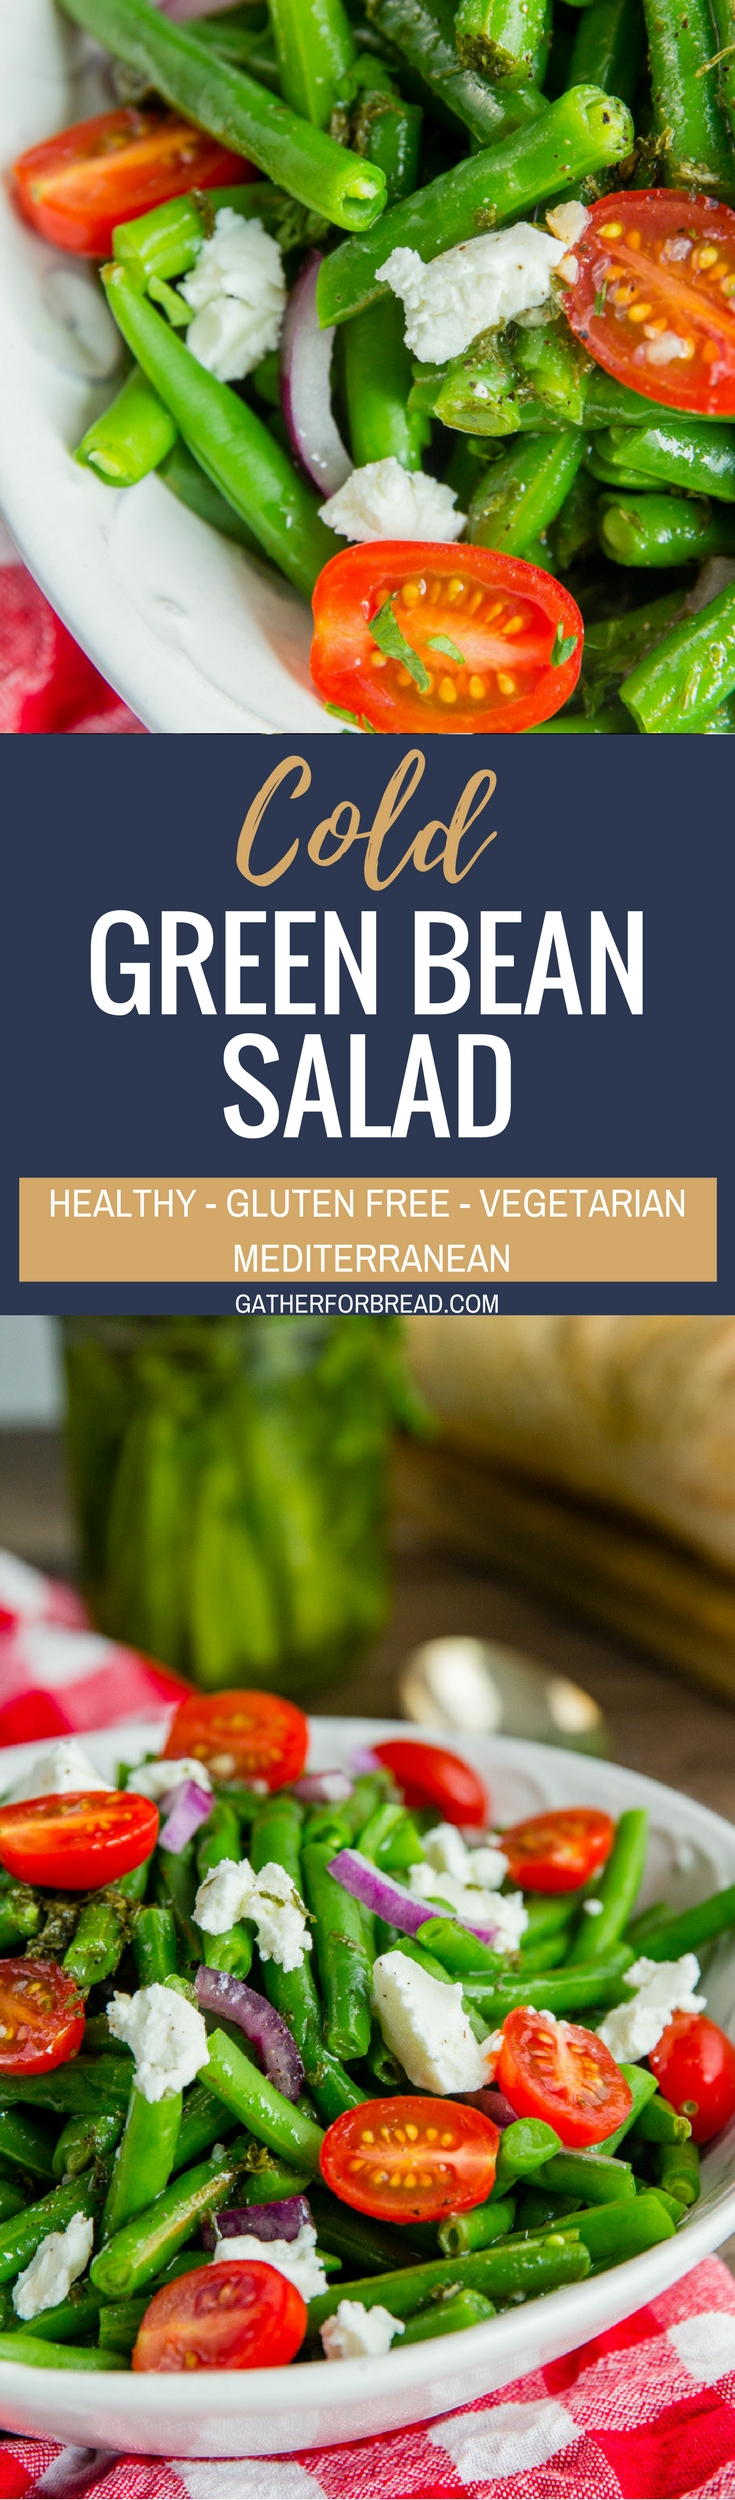 Cold Green Bean Salad - Best Marinated string bean salad recipe - made with a homemade vinaigrette, perfect healthy side dish for summer picnics, potlucks, grilling and more.